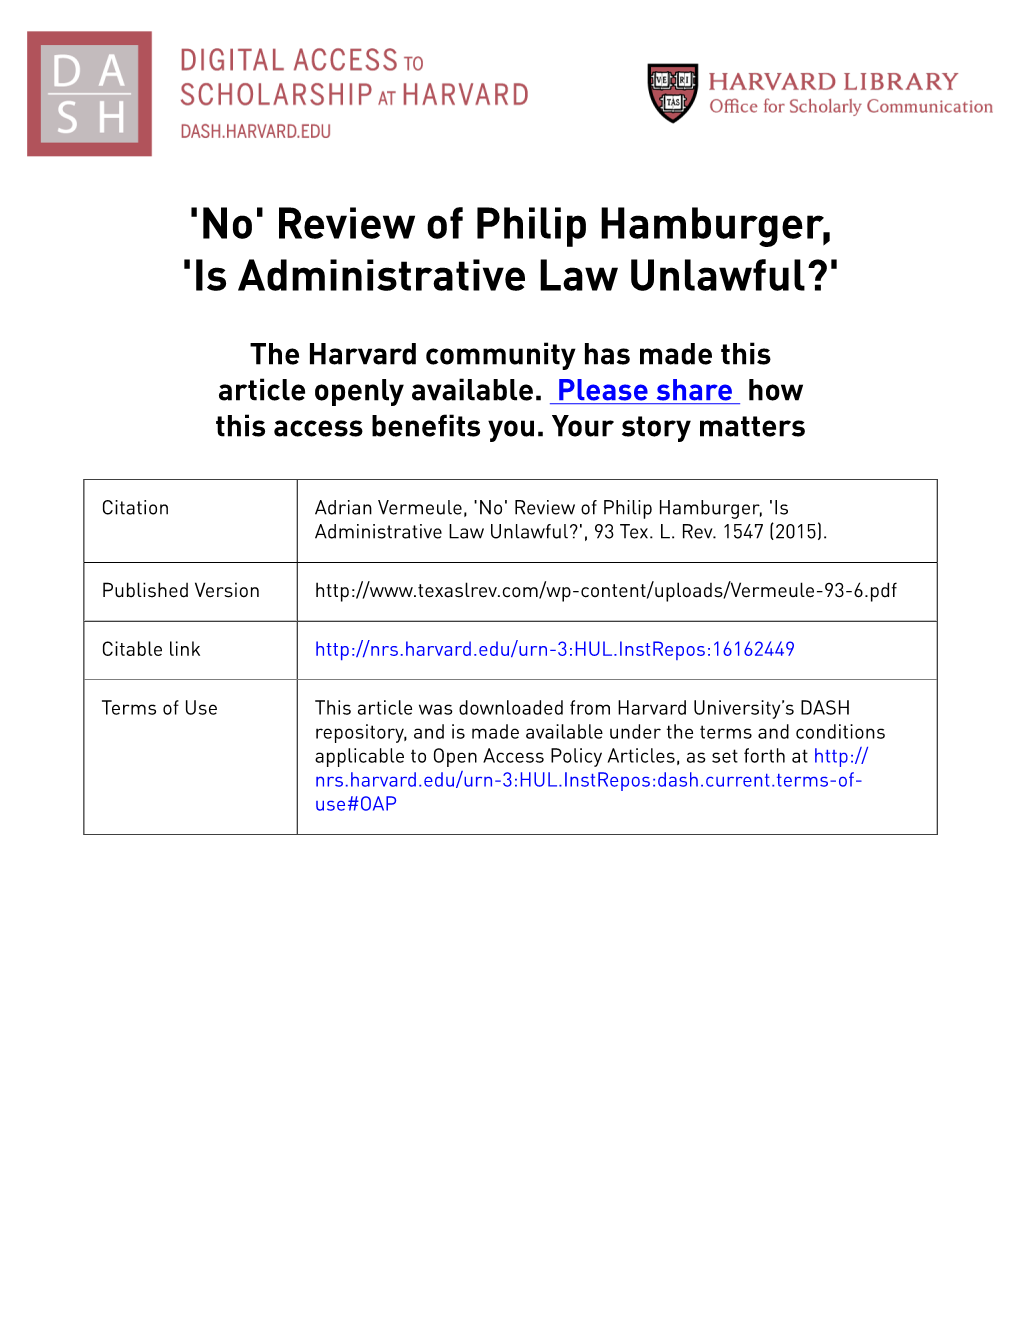 Review of Philip Hamburger, 'Is Administrative Law Unlawful?'